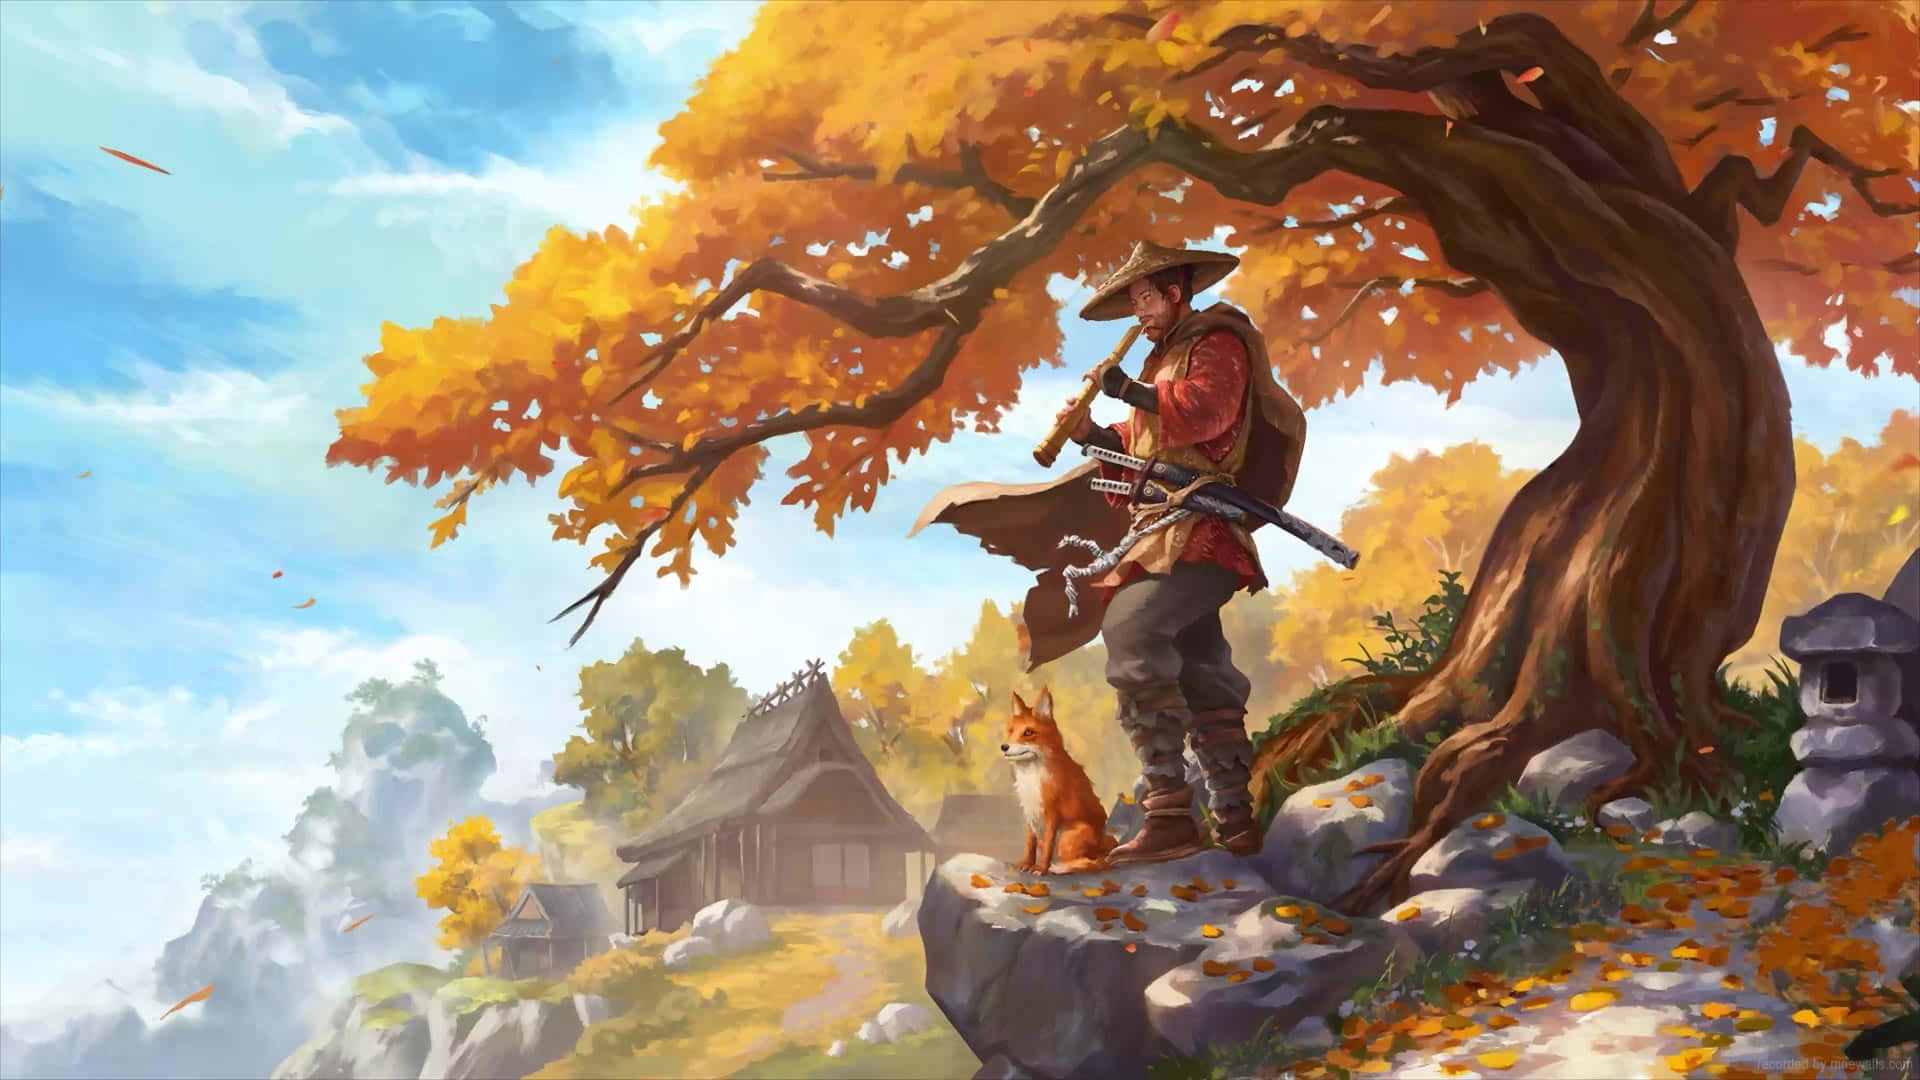 A Man Is Standing Under A Tree With A Sword